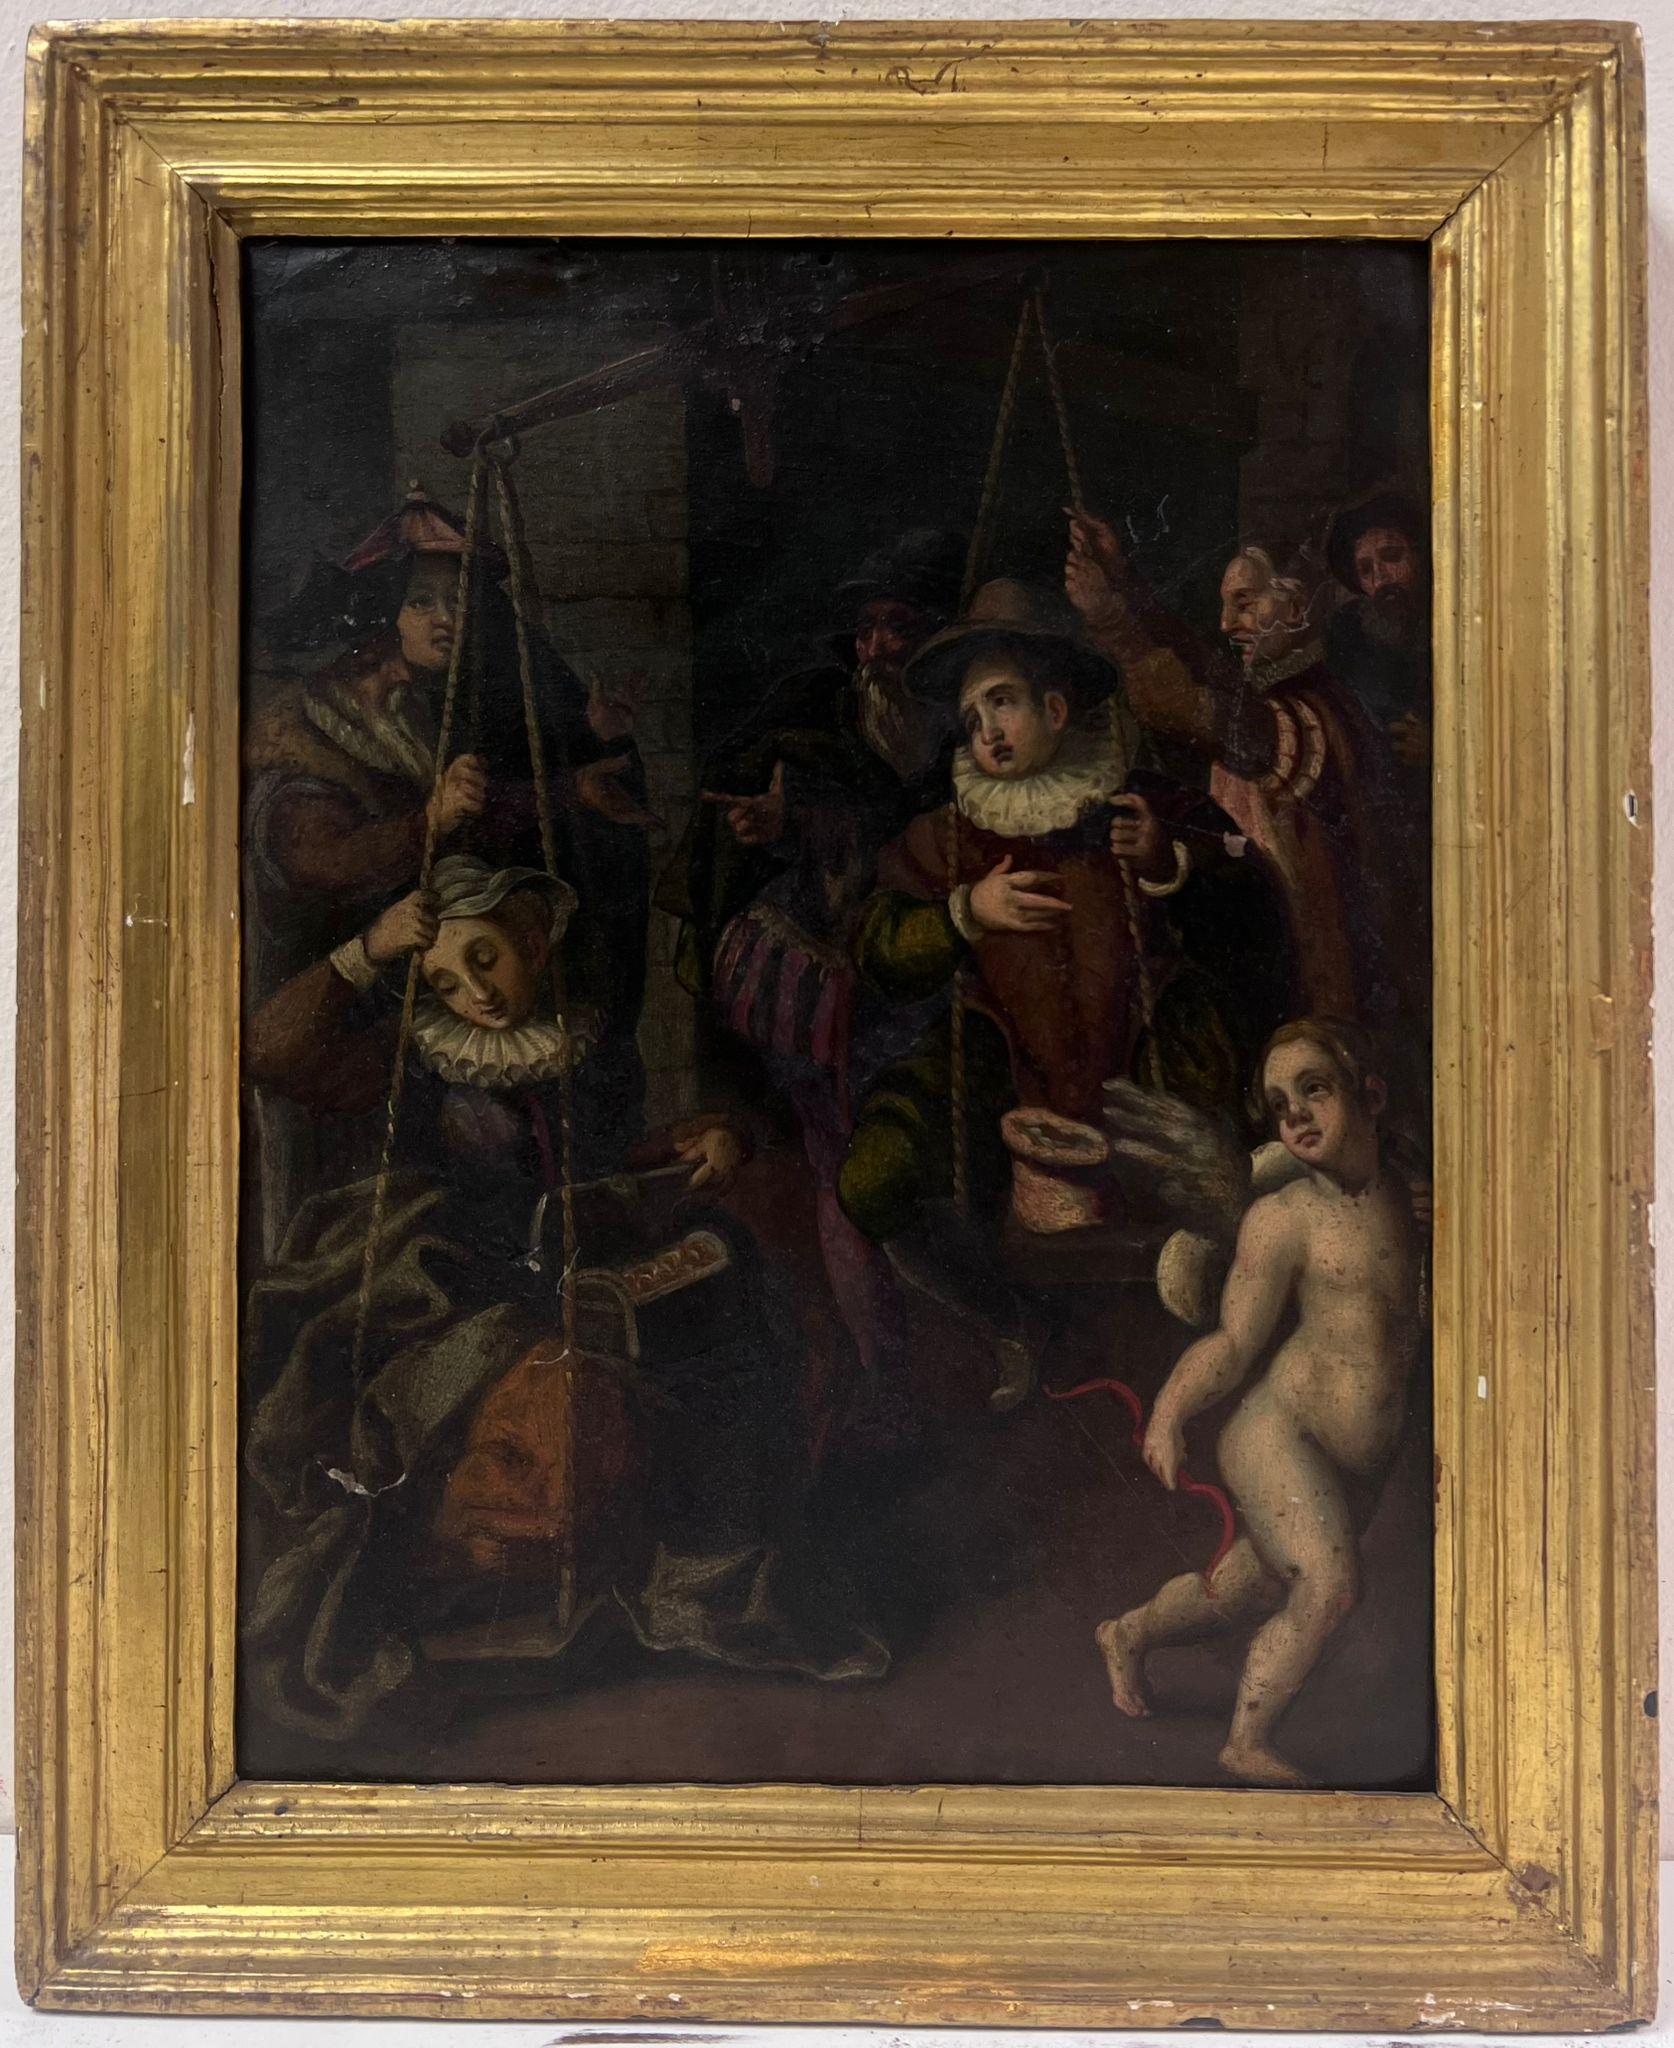 The Tax Collectors
Italian School, early 18th century
oil on copper panel, framed
framed: 14 x 11.5 inches
copper panel : 11.5  x 9 inches
provenance: private collection, UK
condition: very good and sound condition 